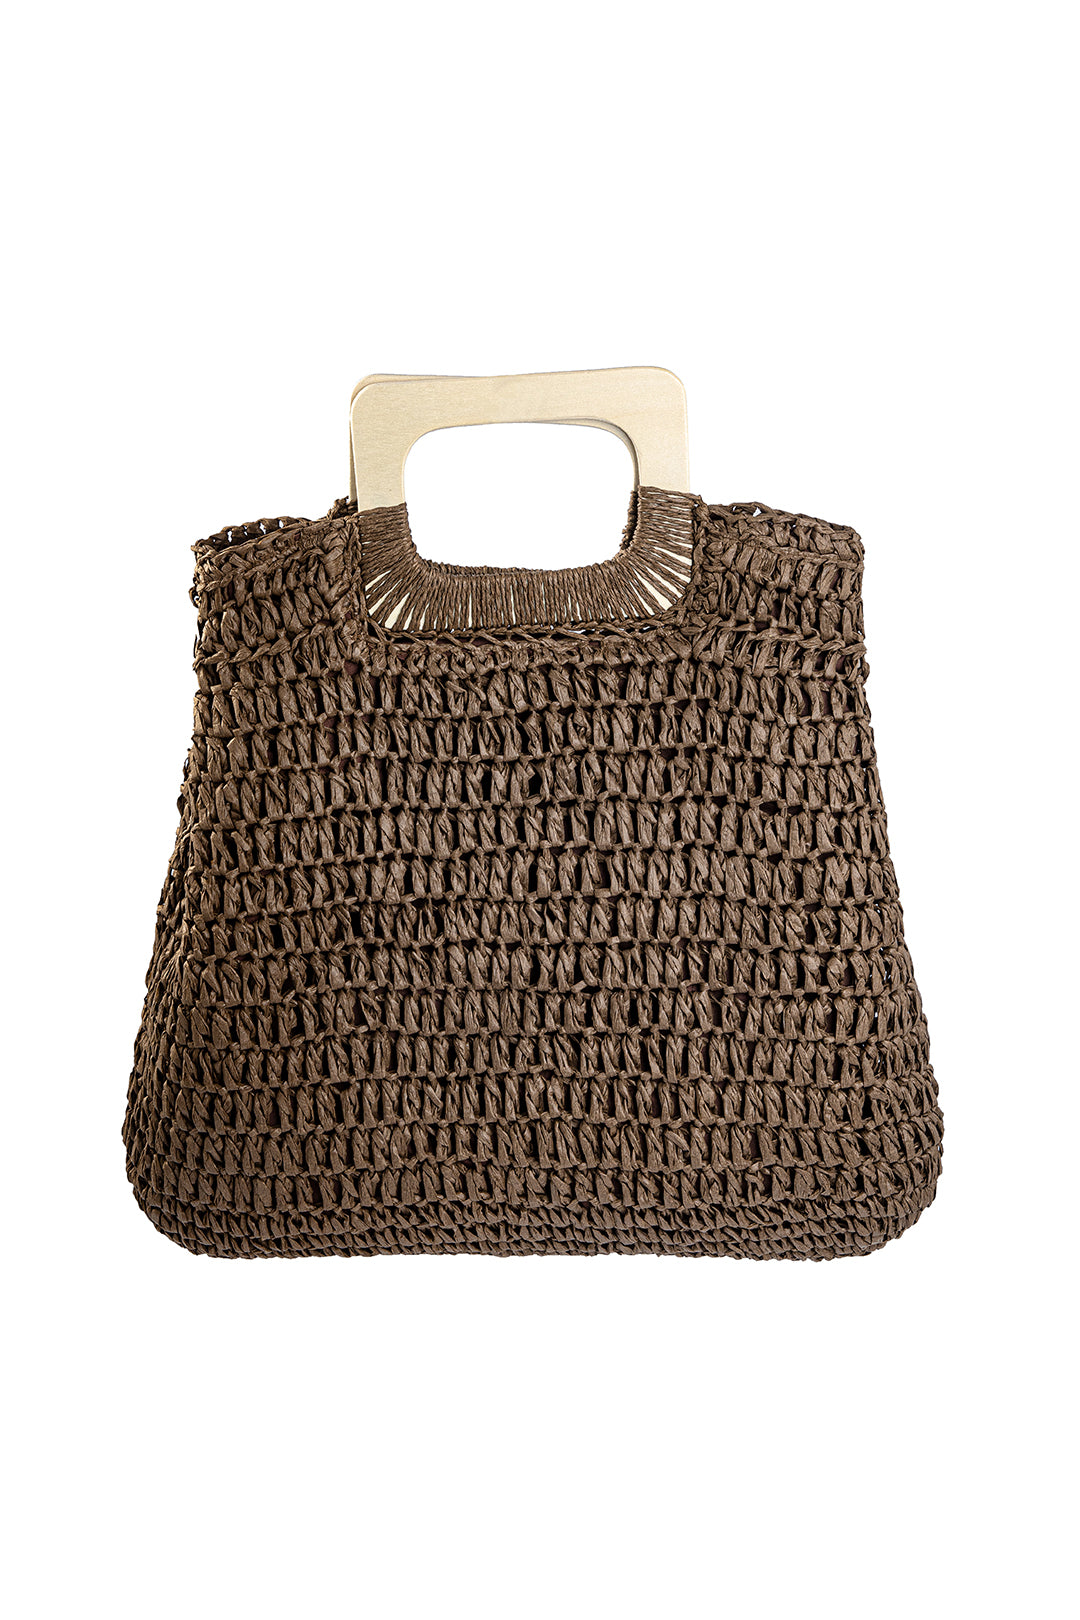 Square-Shaped Woven Straw Tote Bag